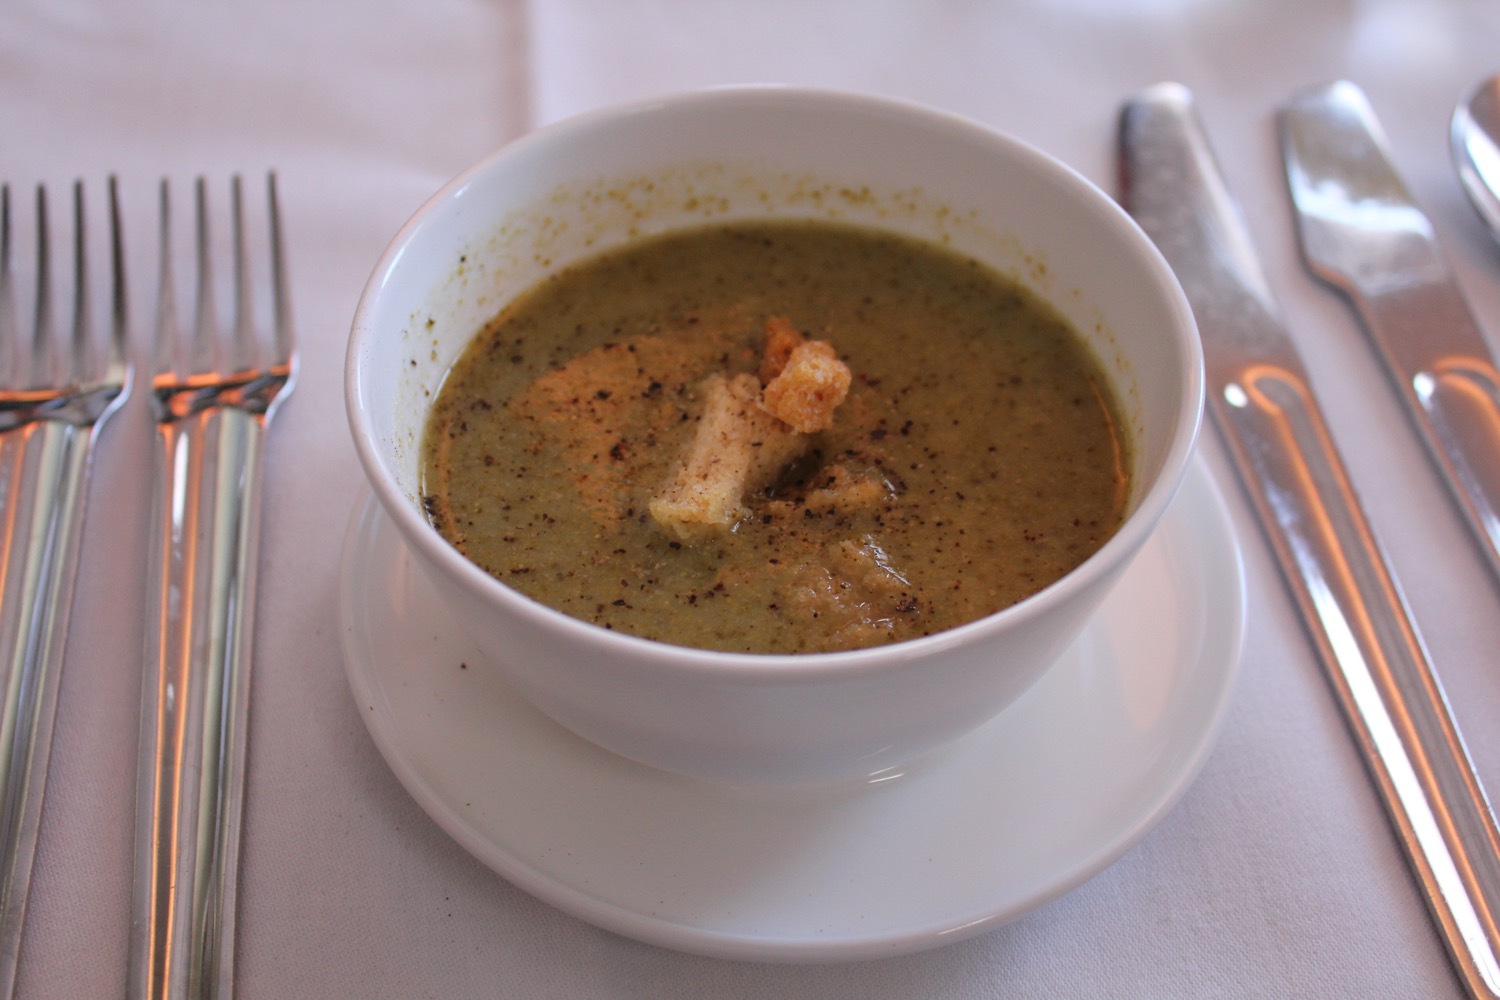 a bowl of soup with a fork and knife